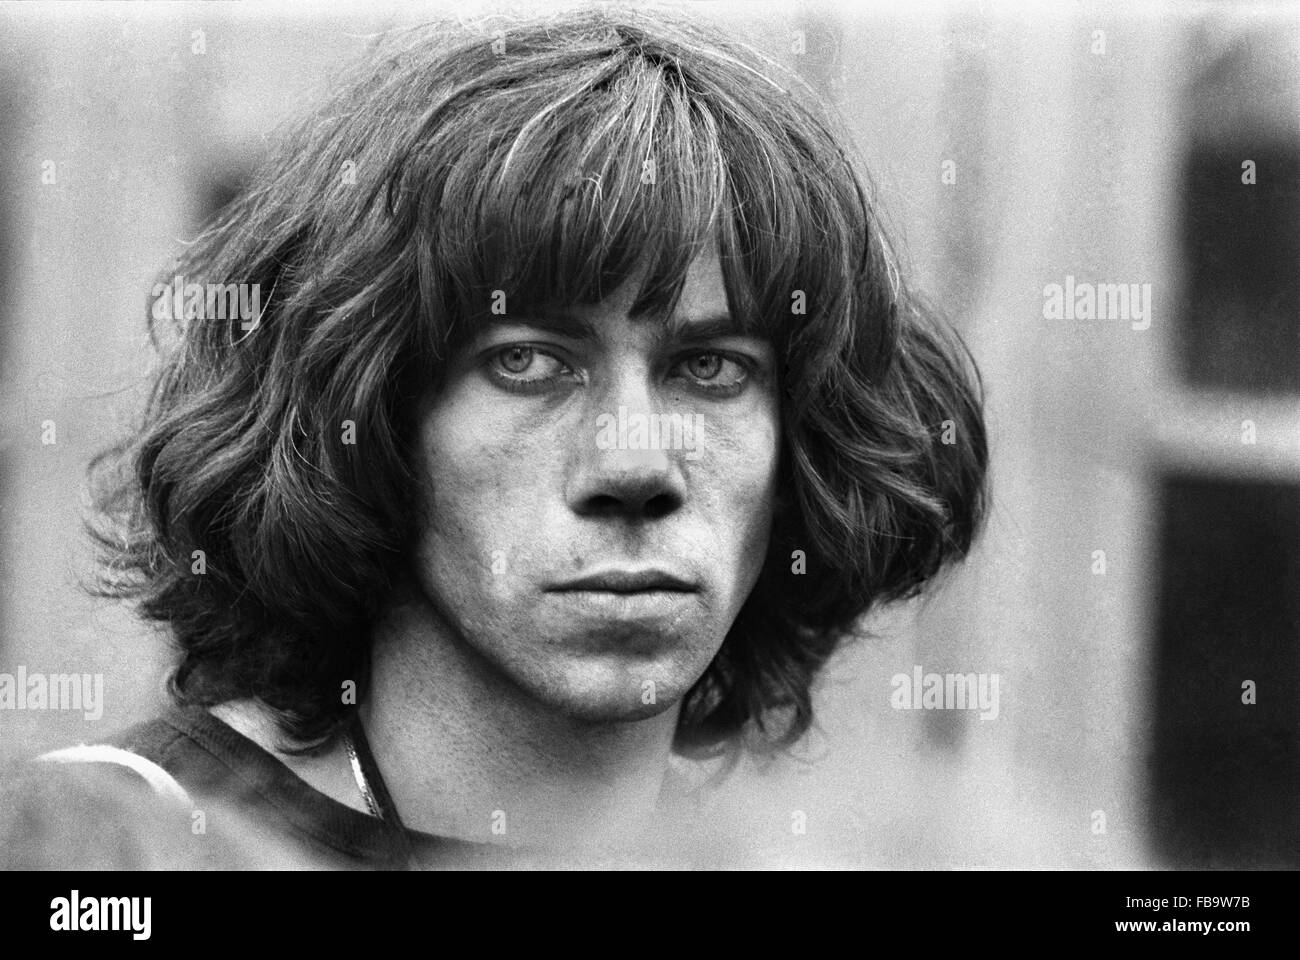 Christian VANDER (drummer, musician, and founder of the band Magma) in 1968. -    -  Christian VANDER (drummer, musician, and founder of the band Magma) in 1968. -  Portrait of VANDER in 1968.   -  Philippe Gras / Le Pictorium Stock Photo